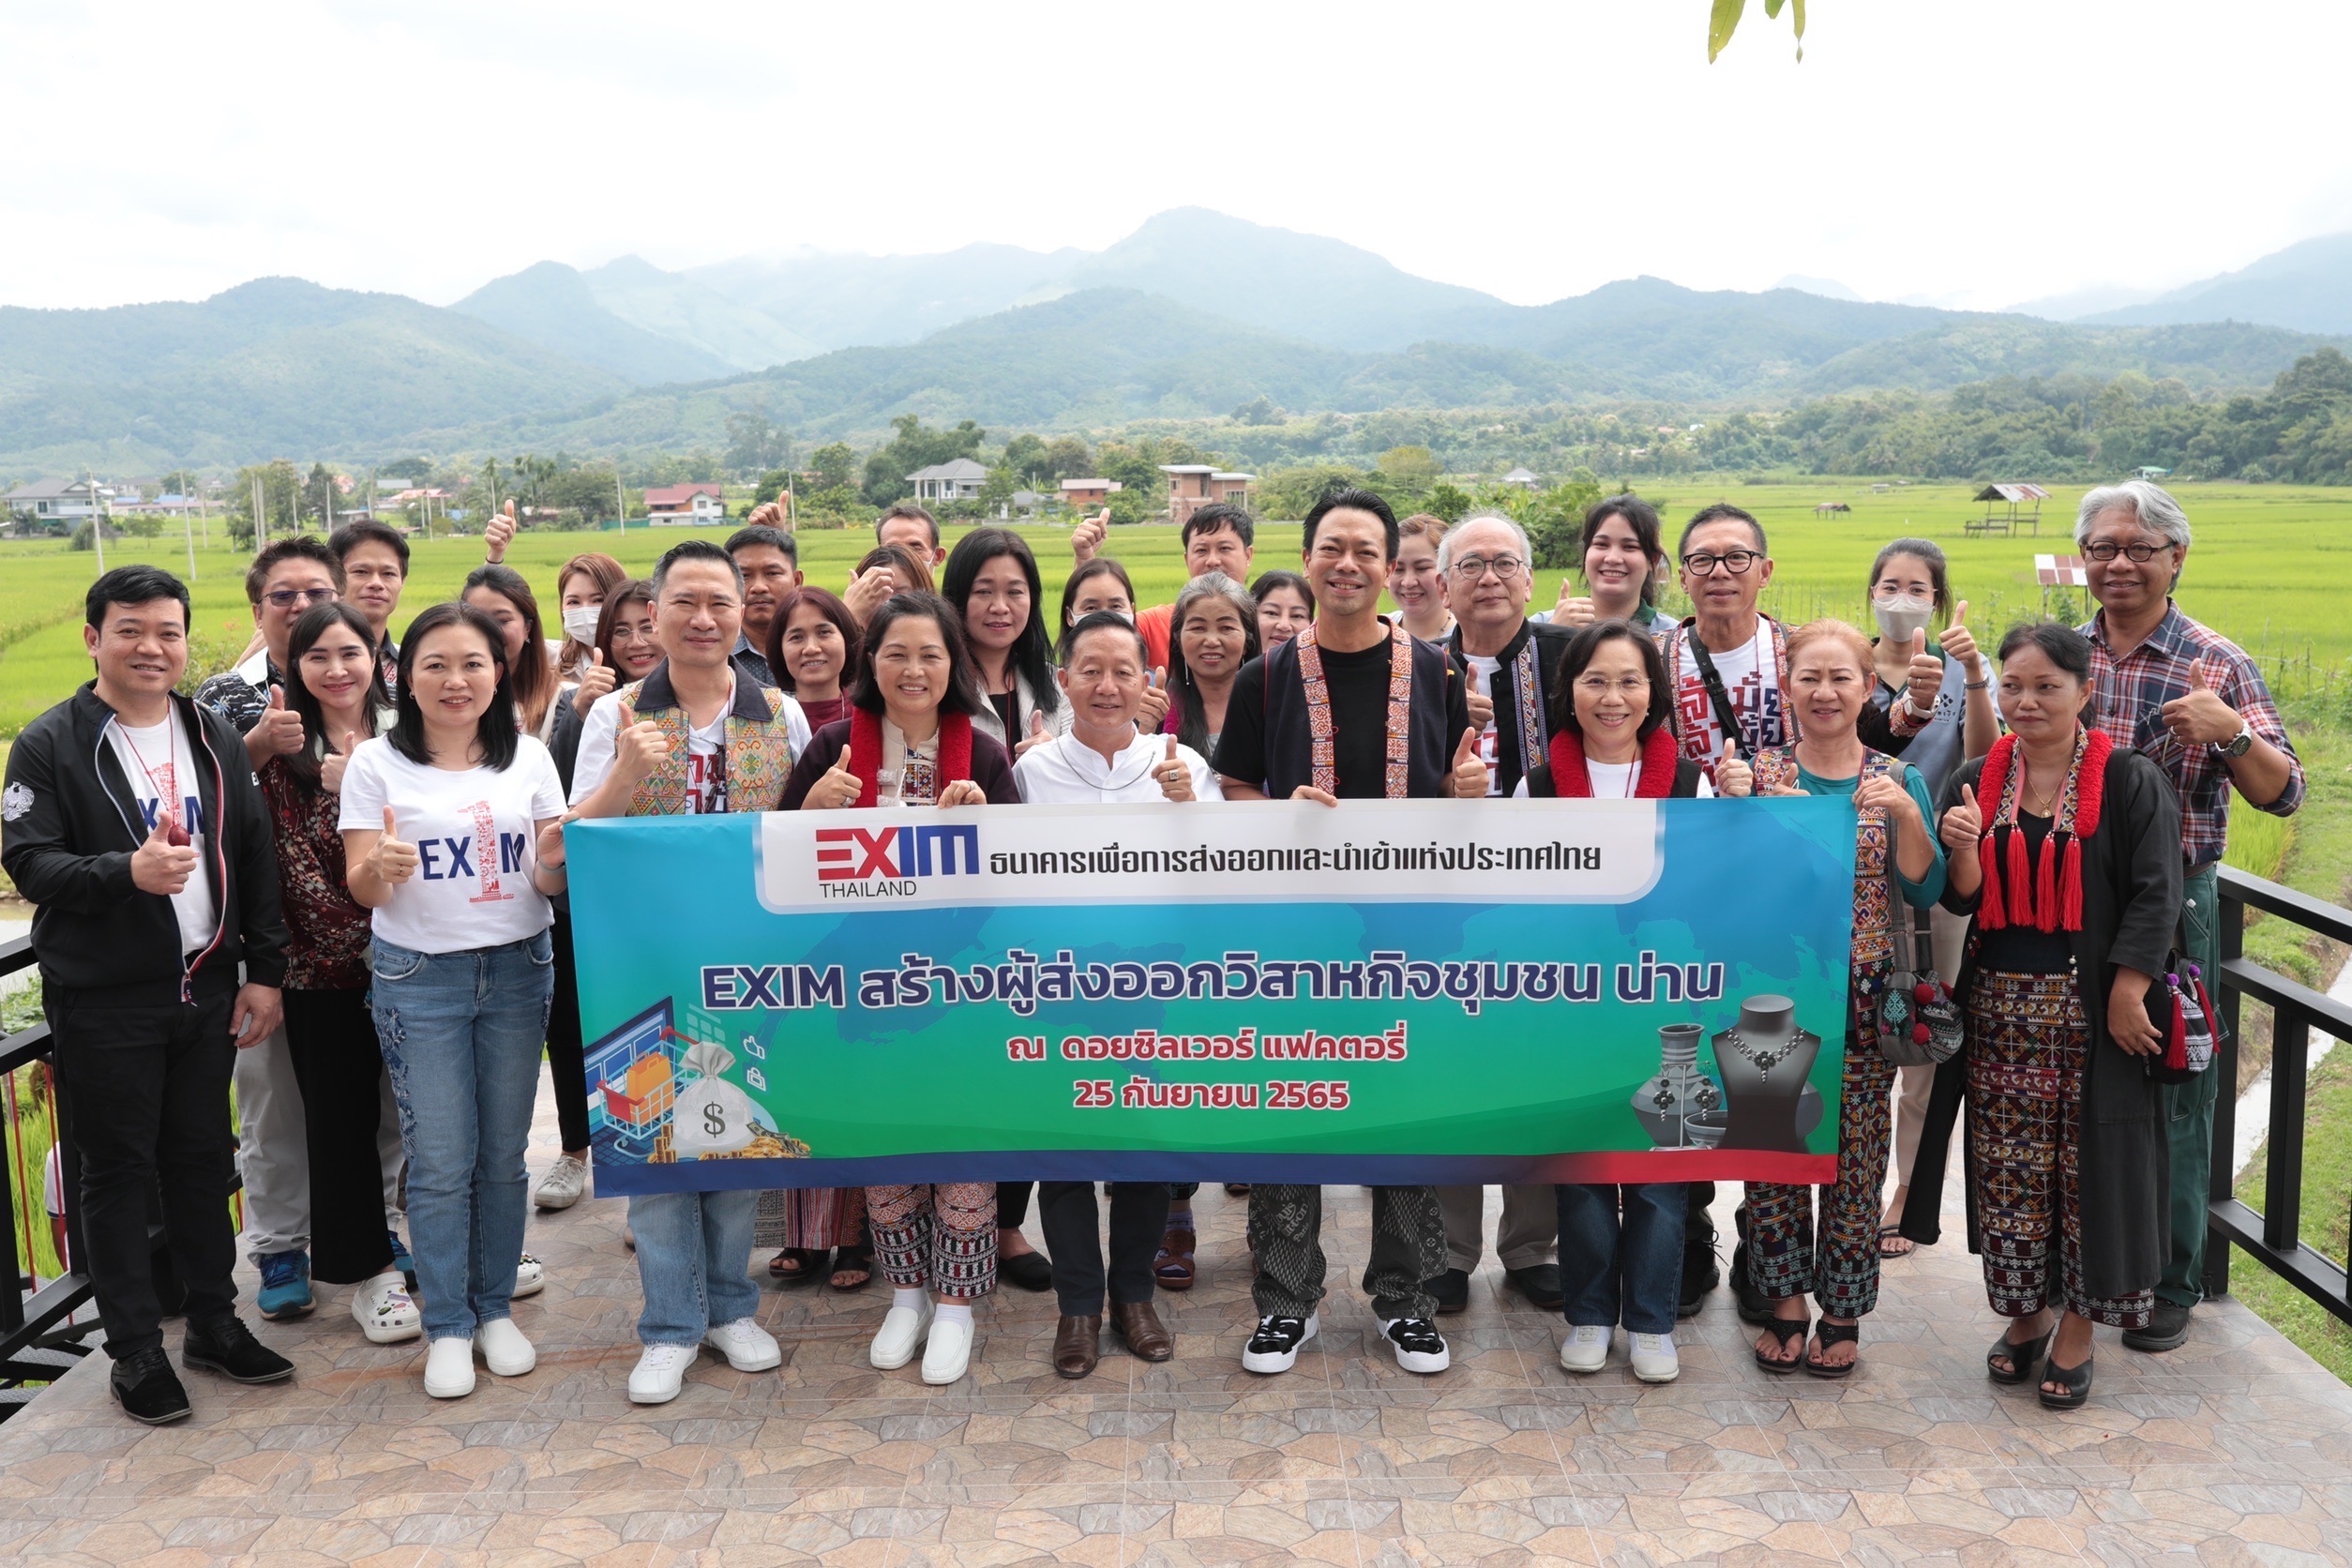 EXIM Thailand Collaborates with TISTR and Rakbankerd Co., Ltd. in Providing Knowledge on Financial Management and Innovation Development of Agricultural Goods of Community Enterprises toward Export an